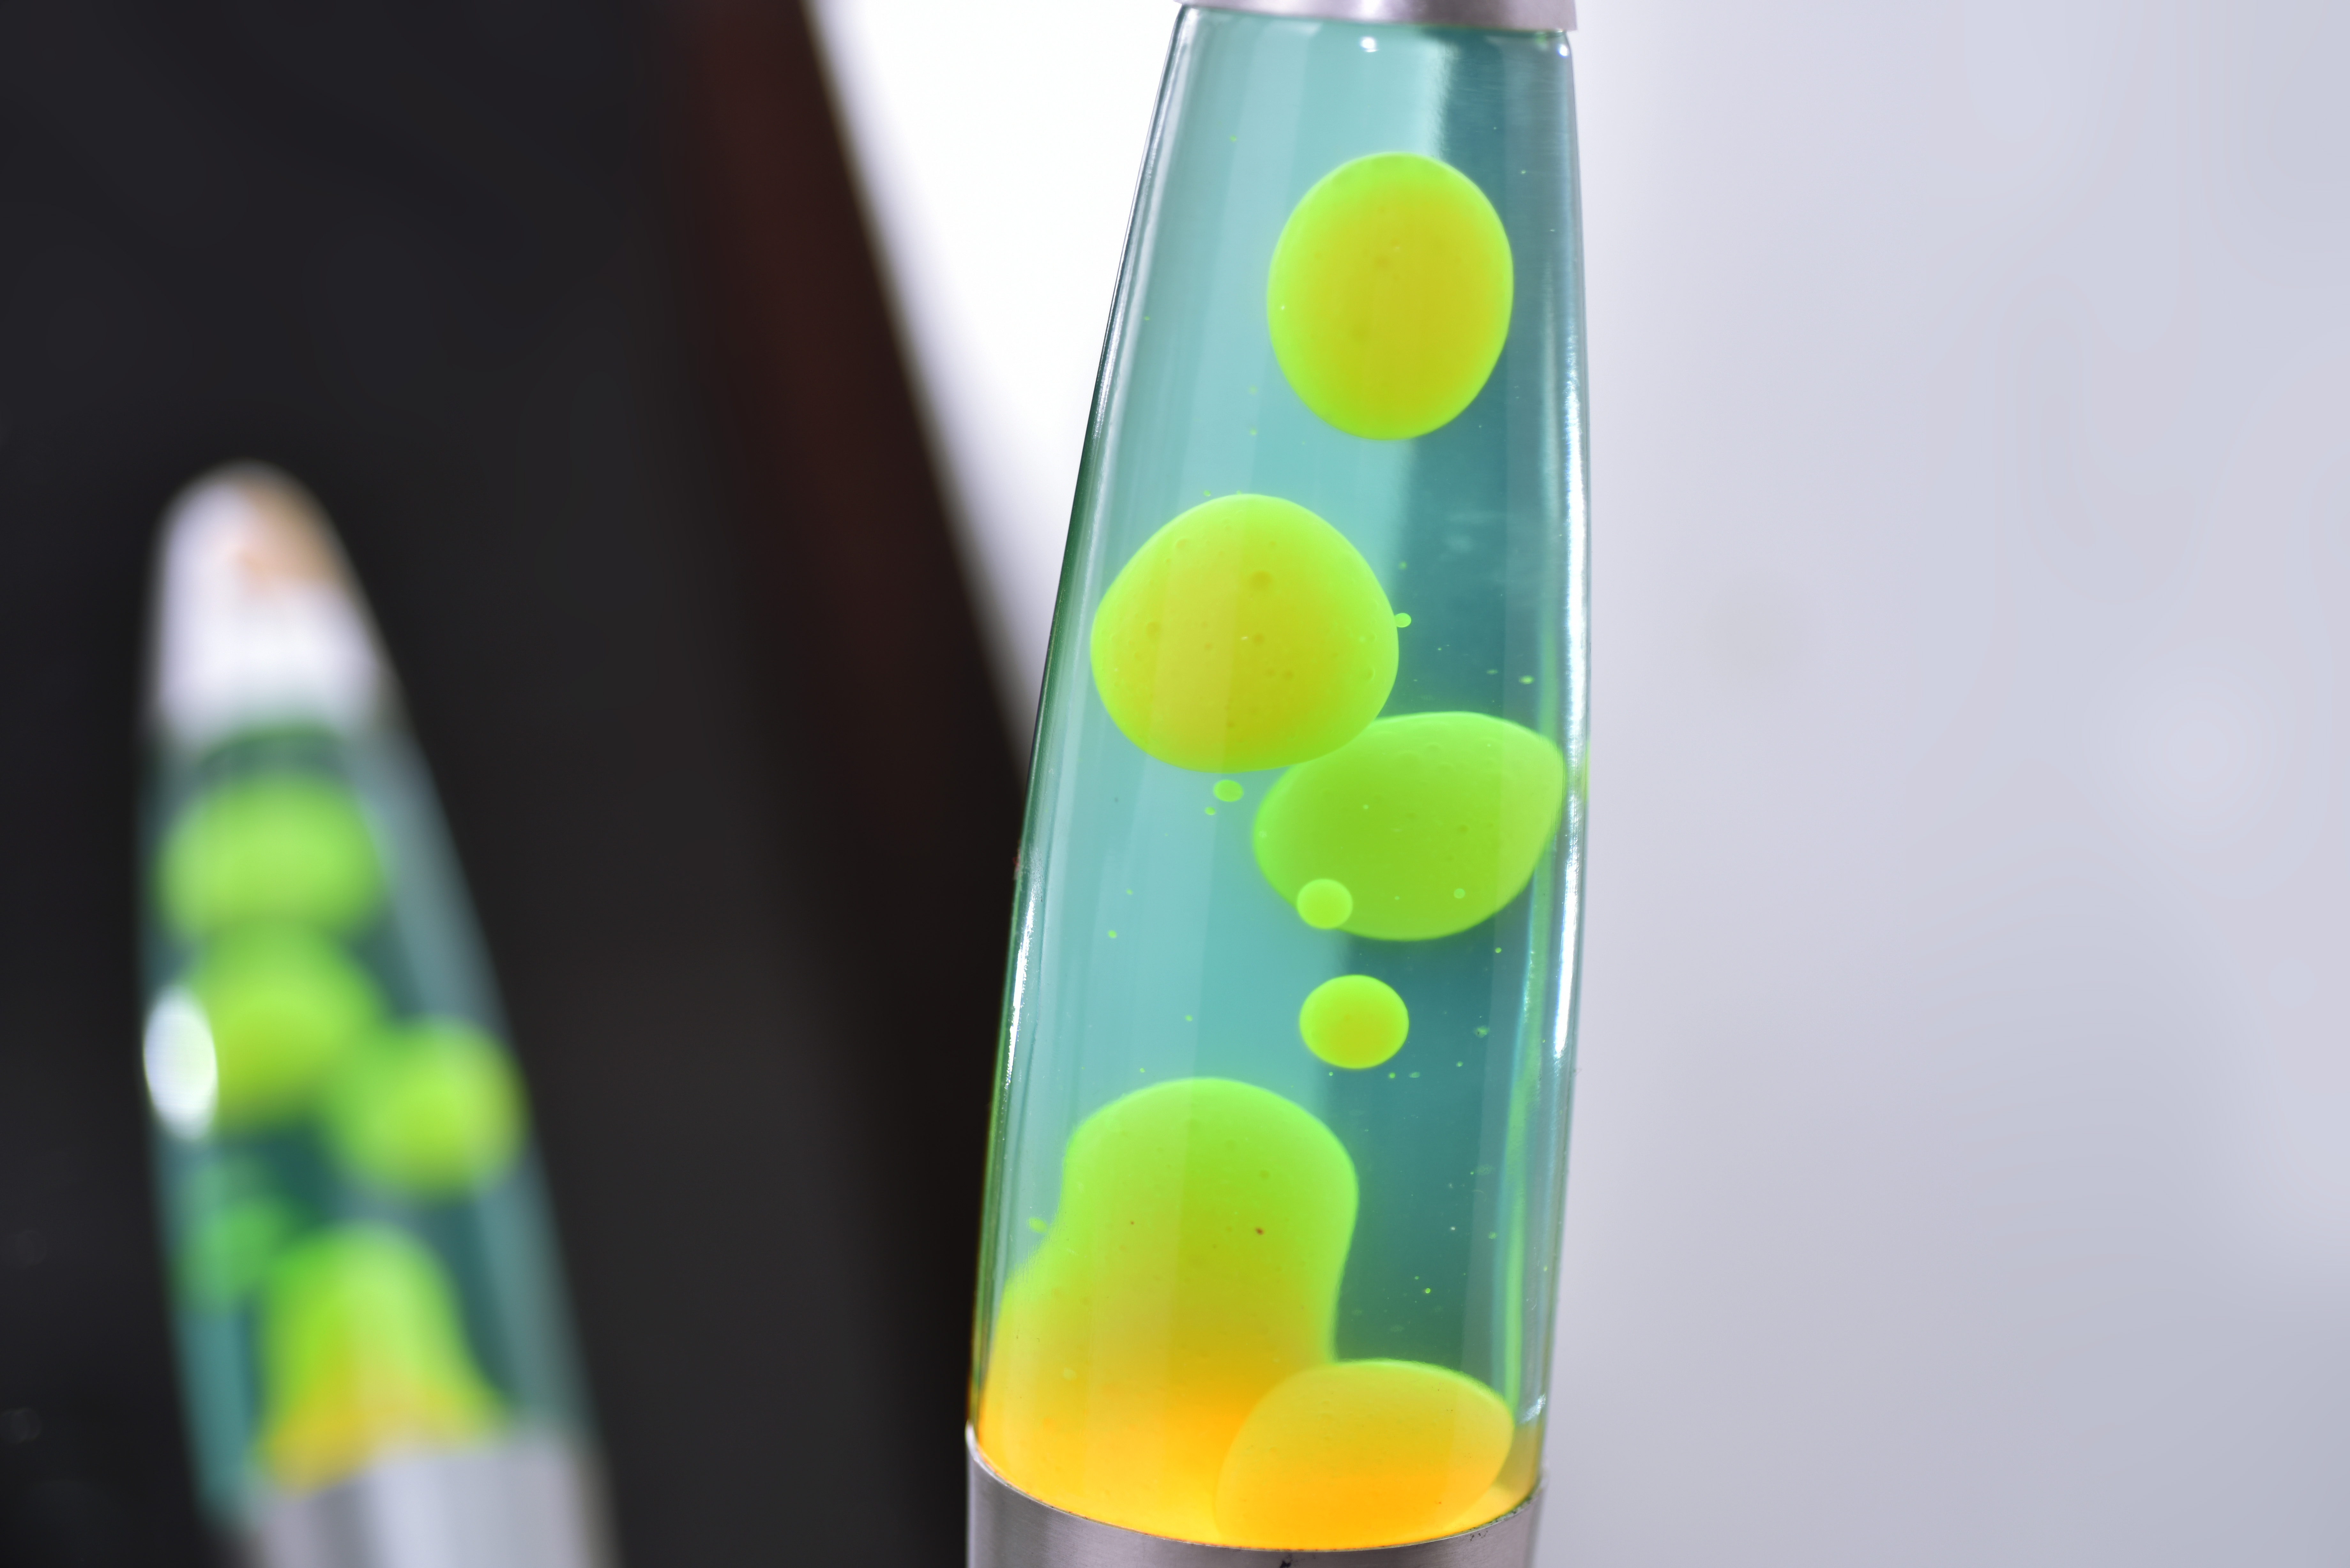 Lava lamp with green and yellow light, one of the things to do with kids